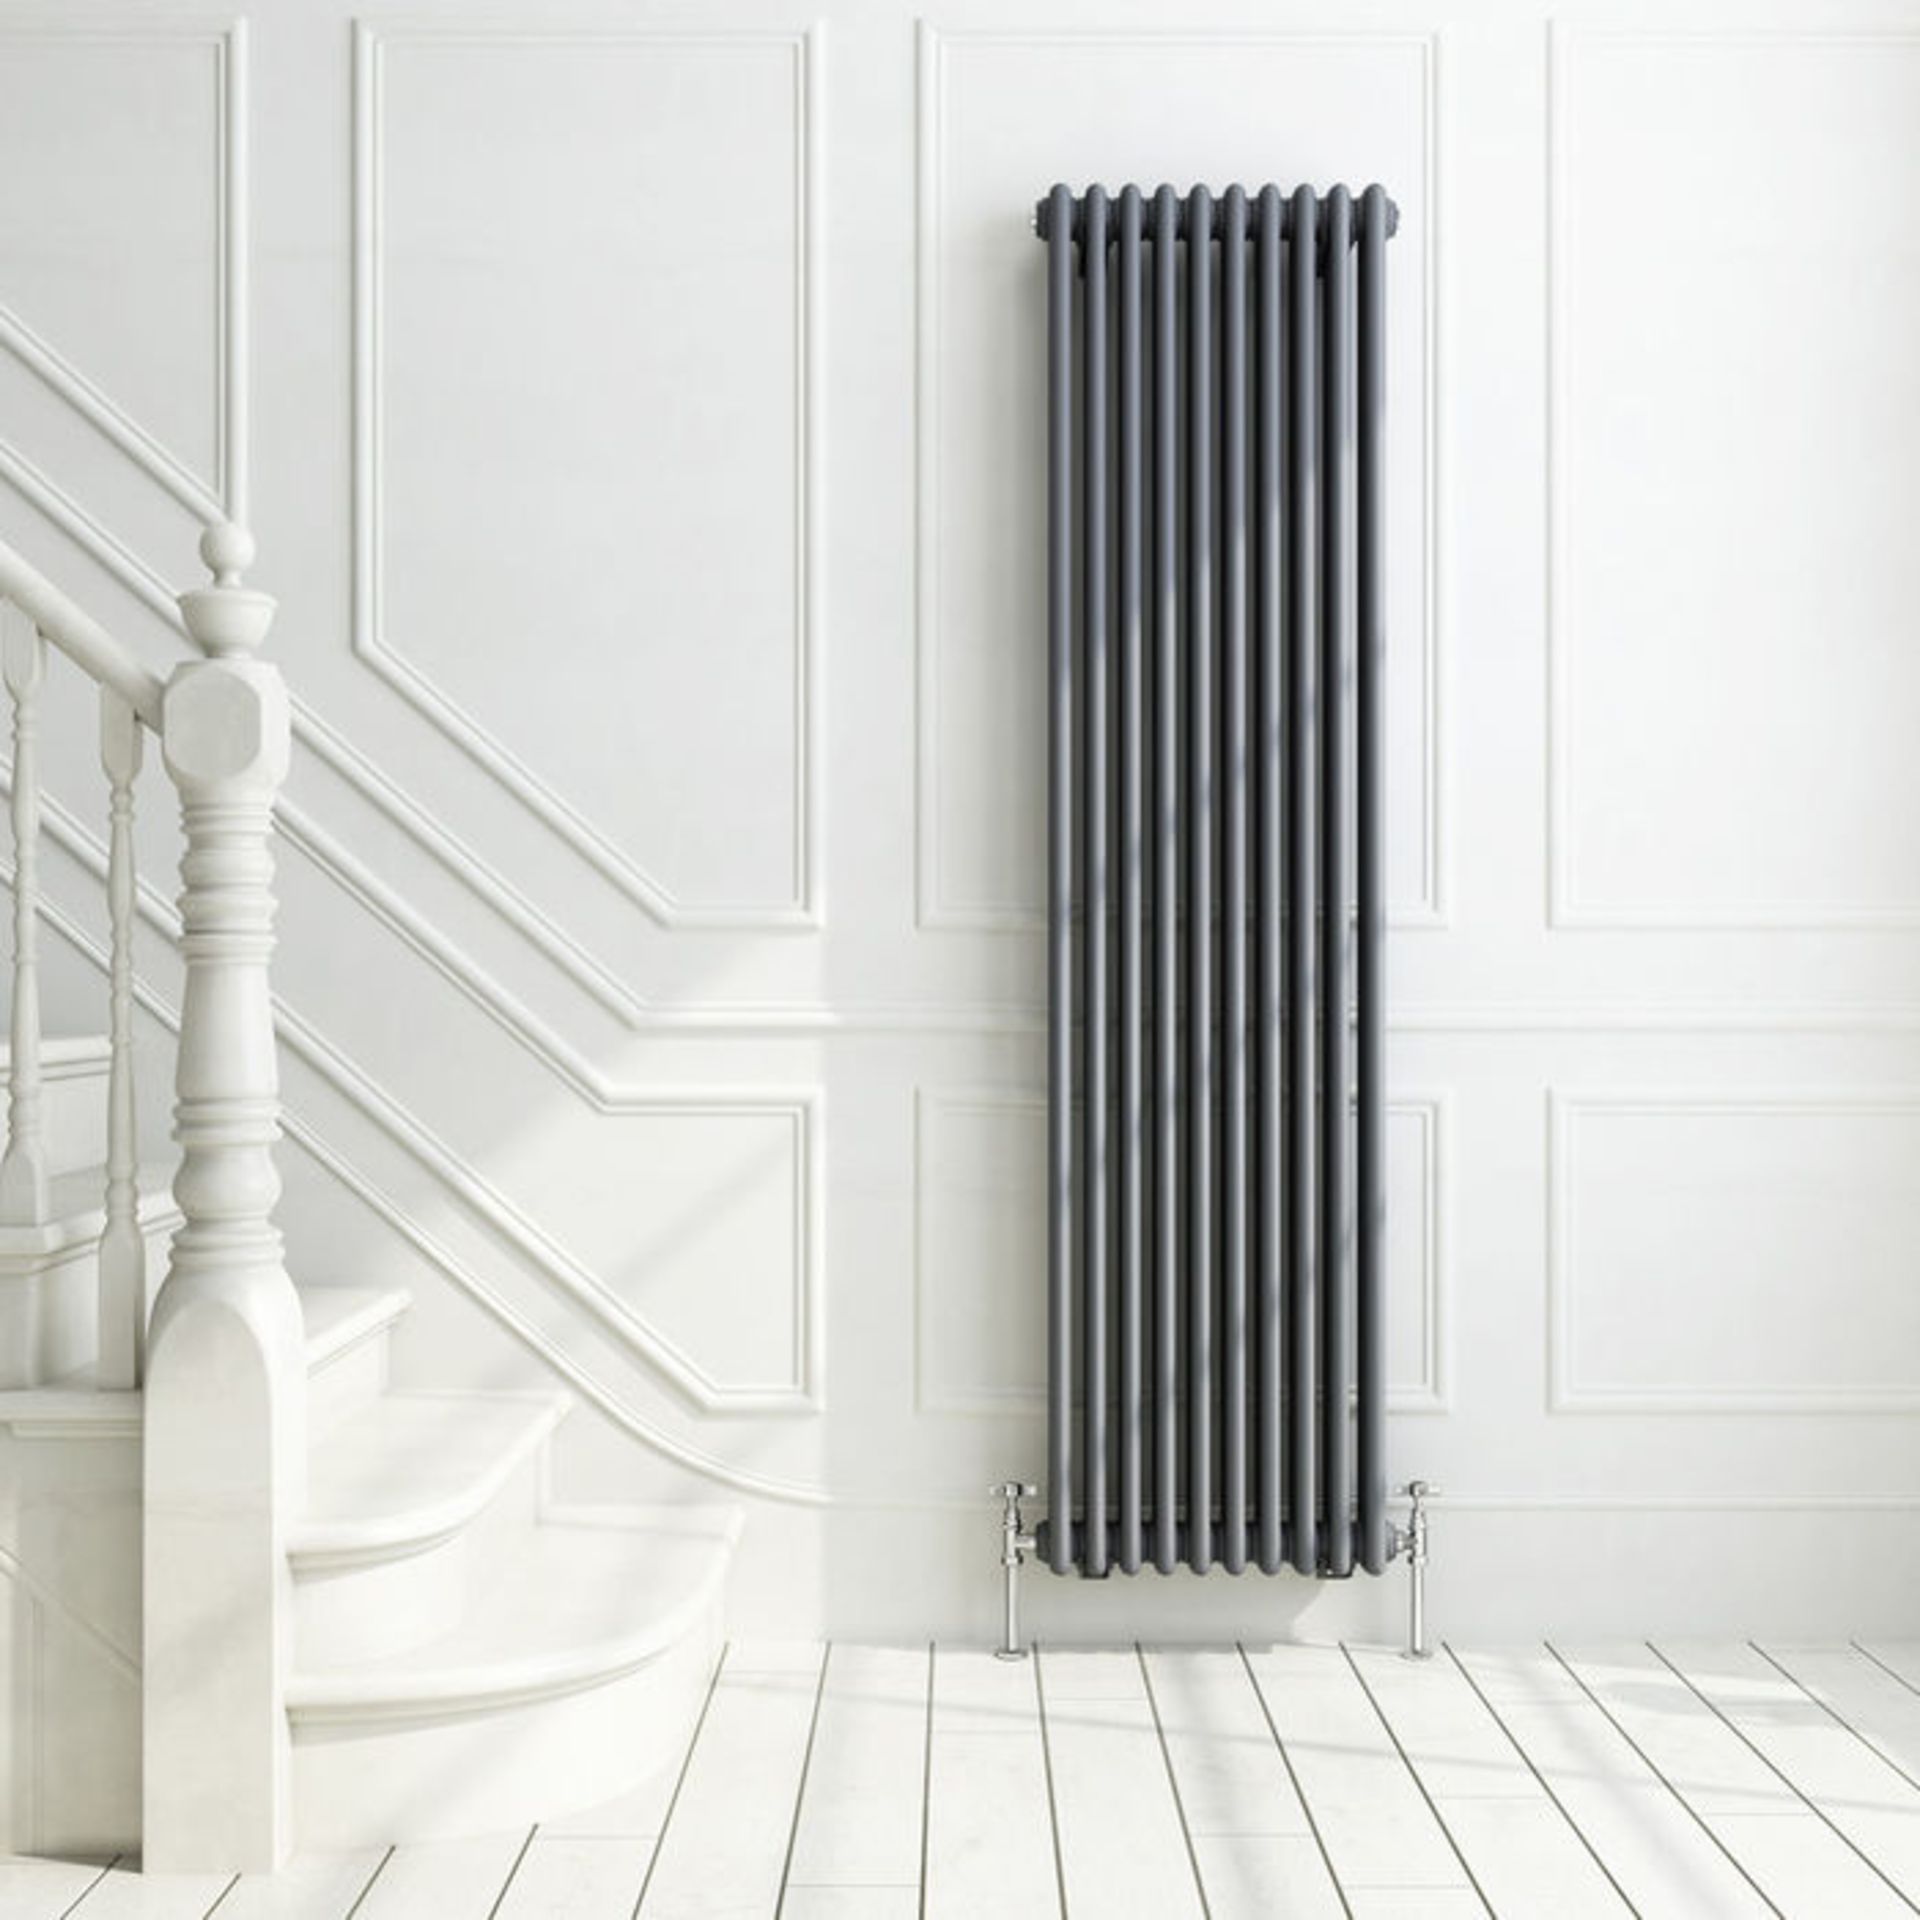 (TA186) 1800x468mm Anthracite Triple Panel Vertical Colosseum Traditional Radiator. RRP £499.99. - Image 2 of 4